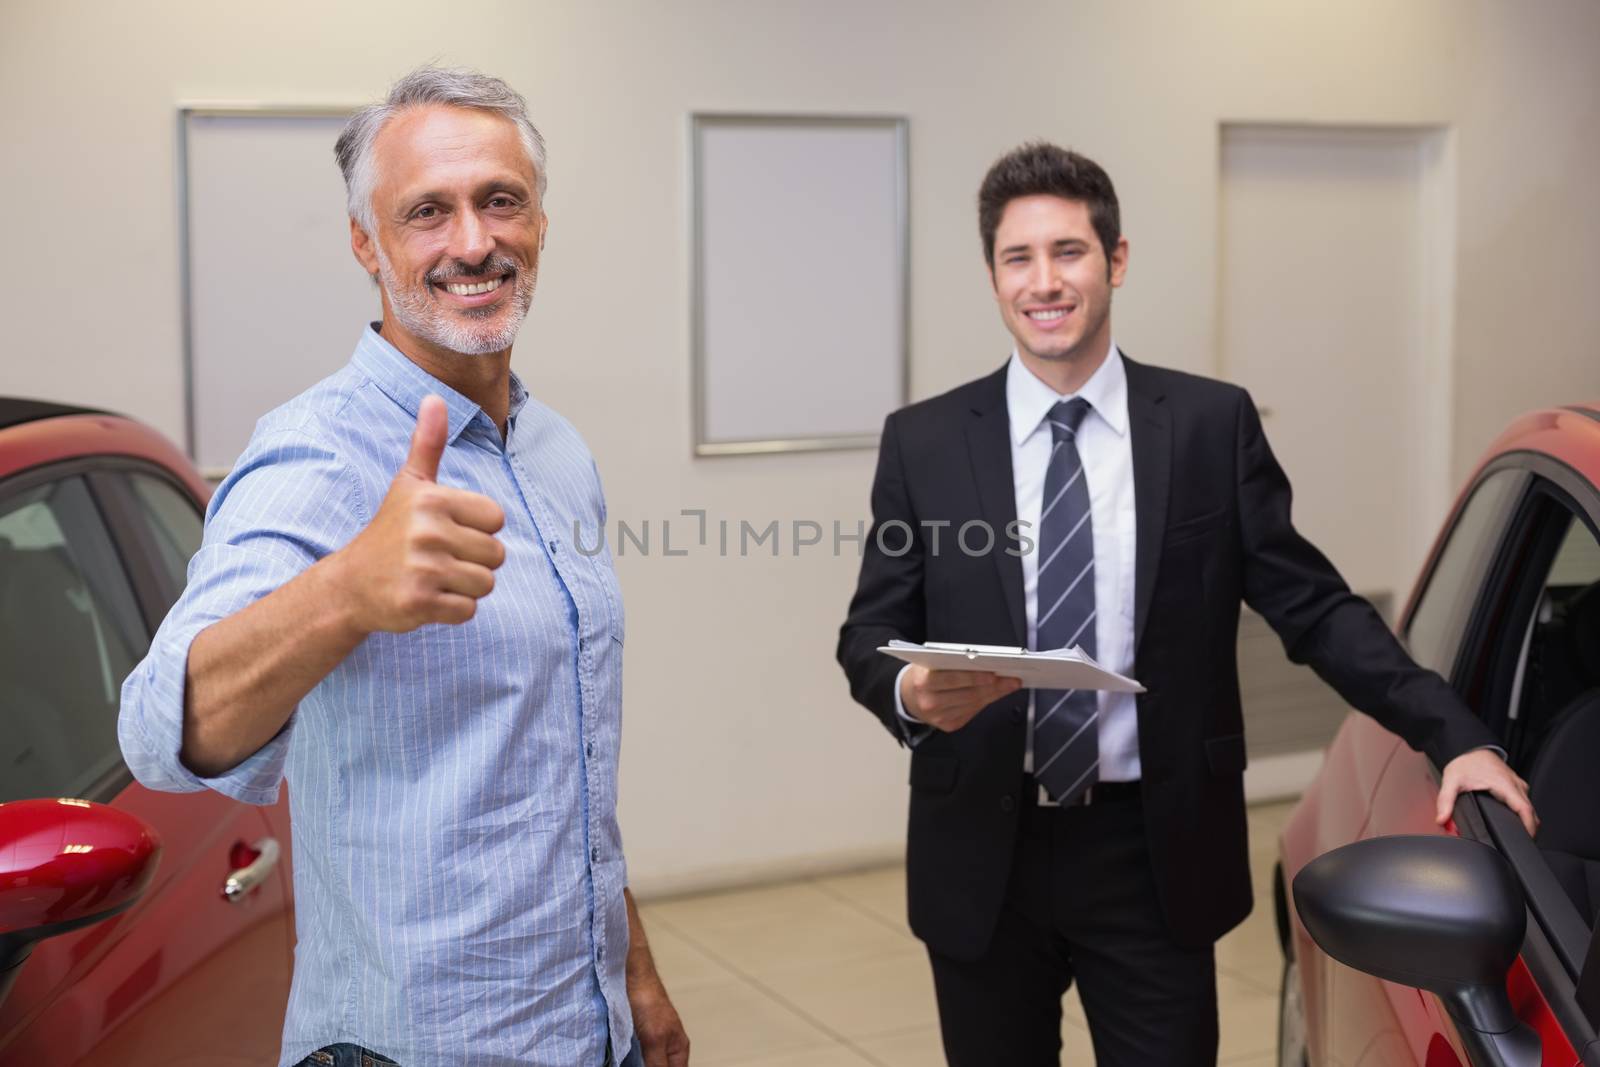 Smiling customer giving thumbs up by Wavebreakmedia